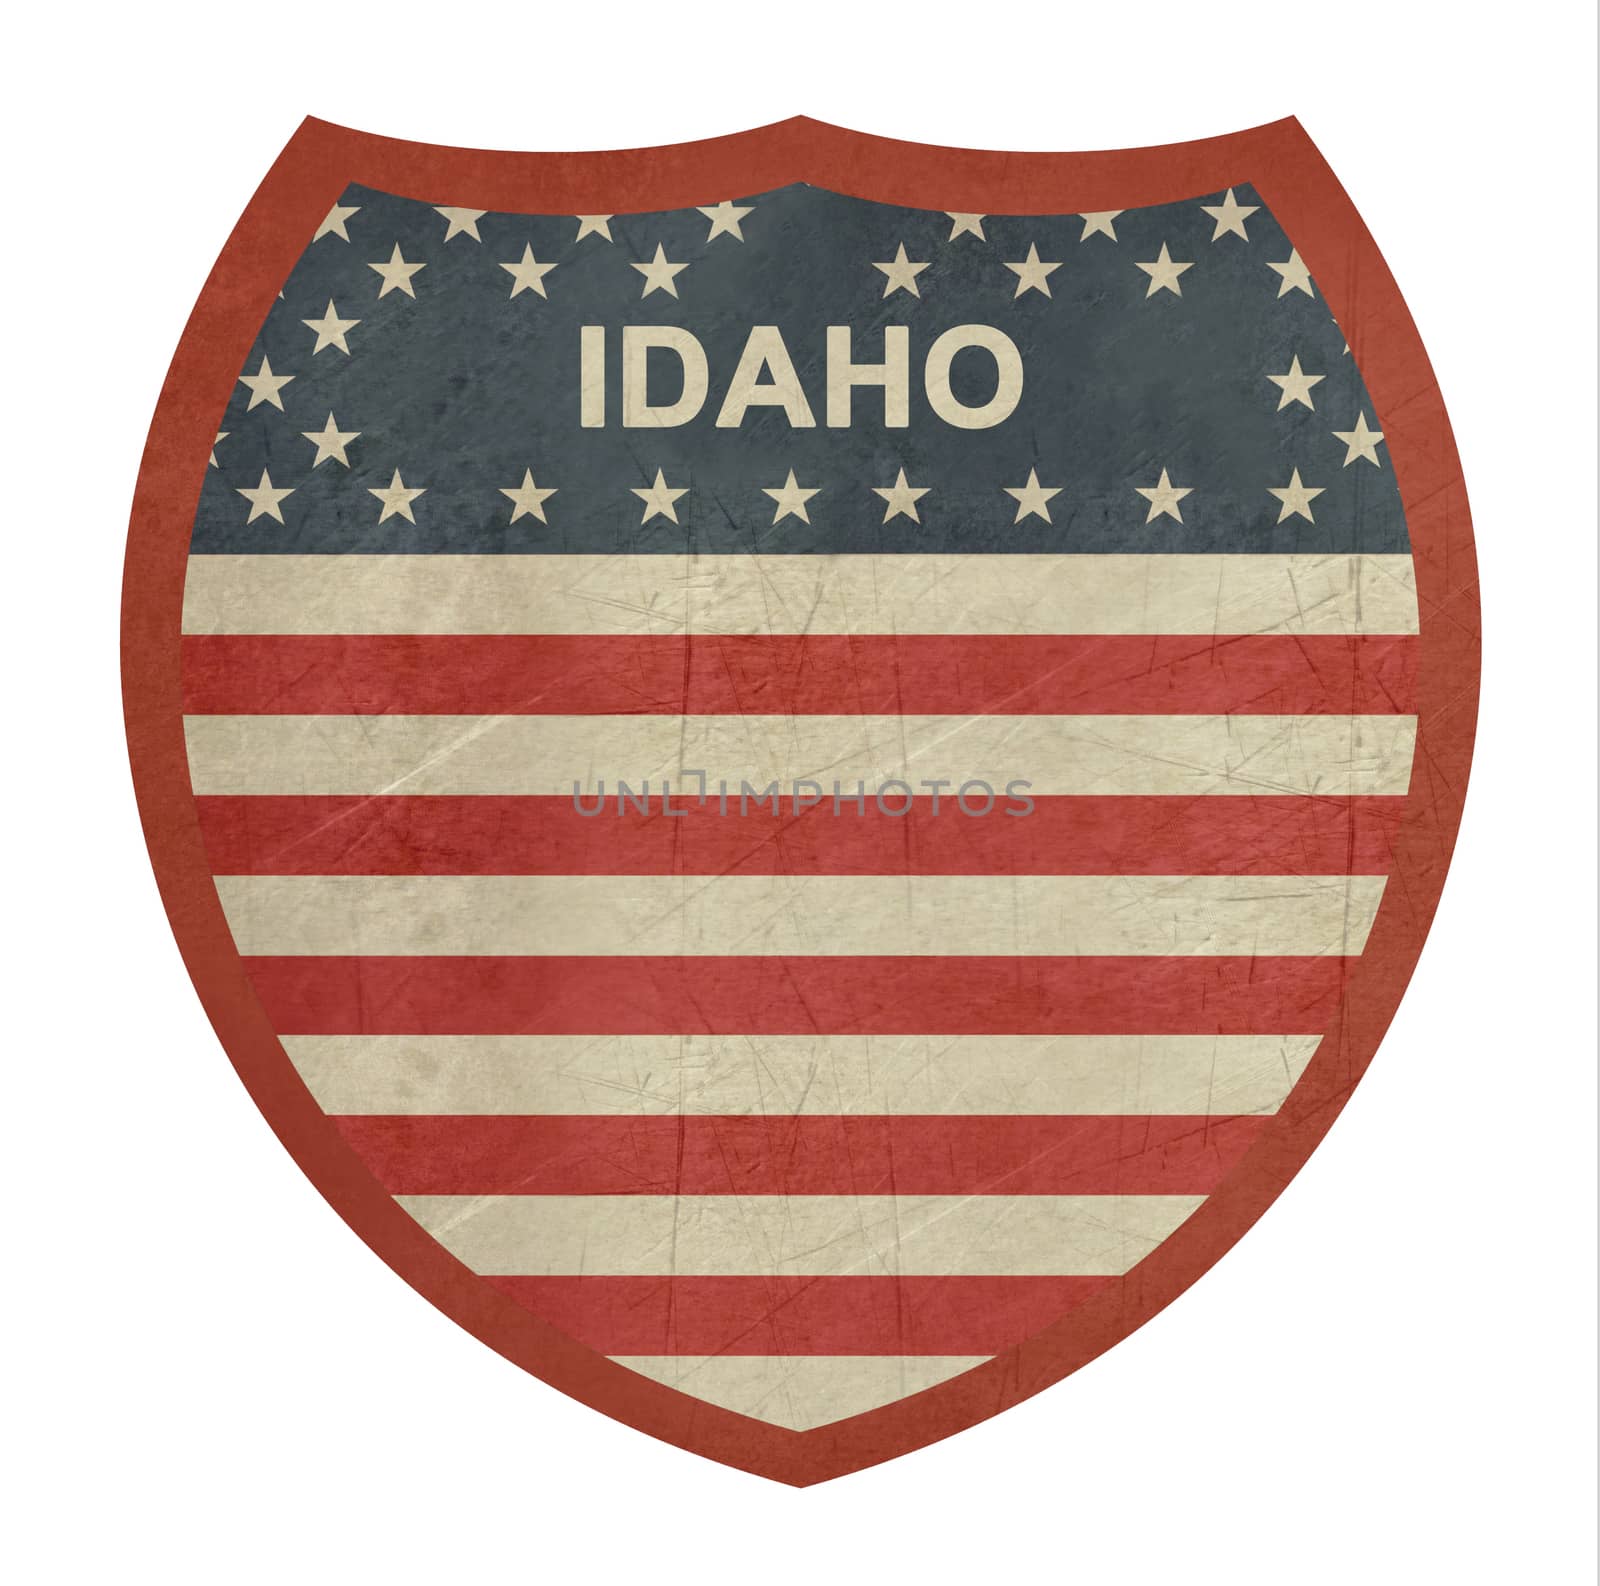 Grunge Idaho American interstate highway sign isolated on a white background.